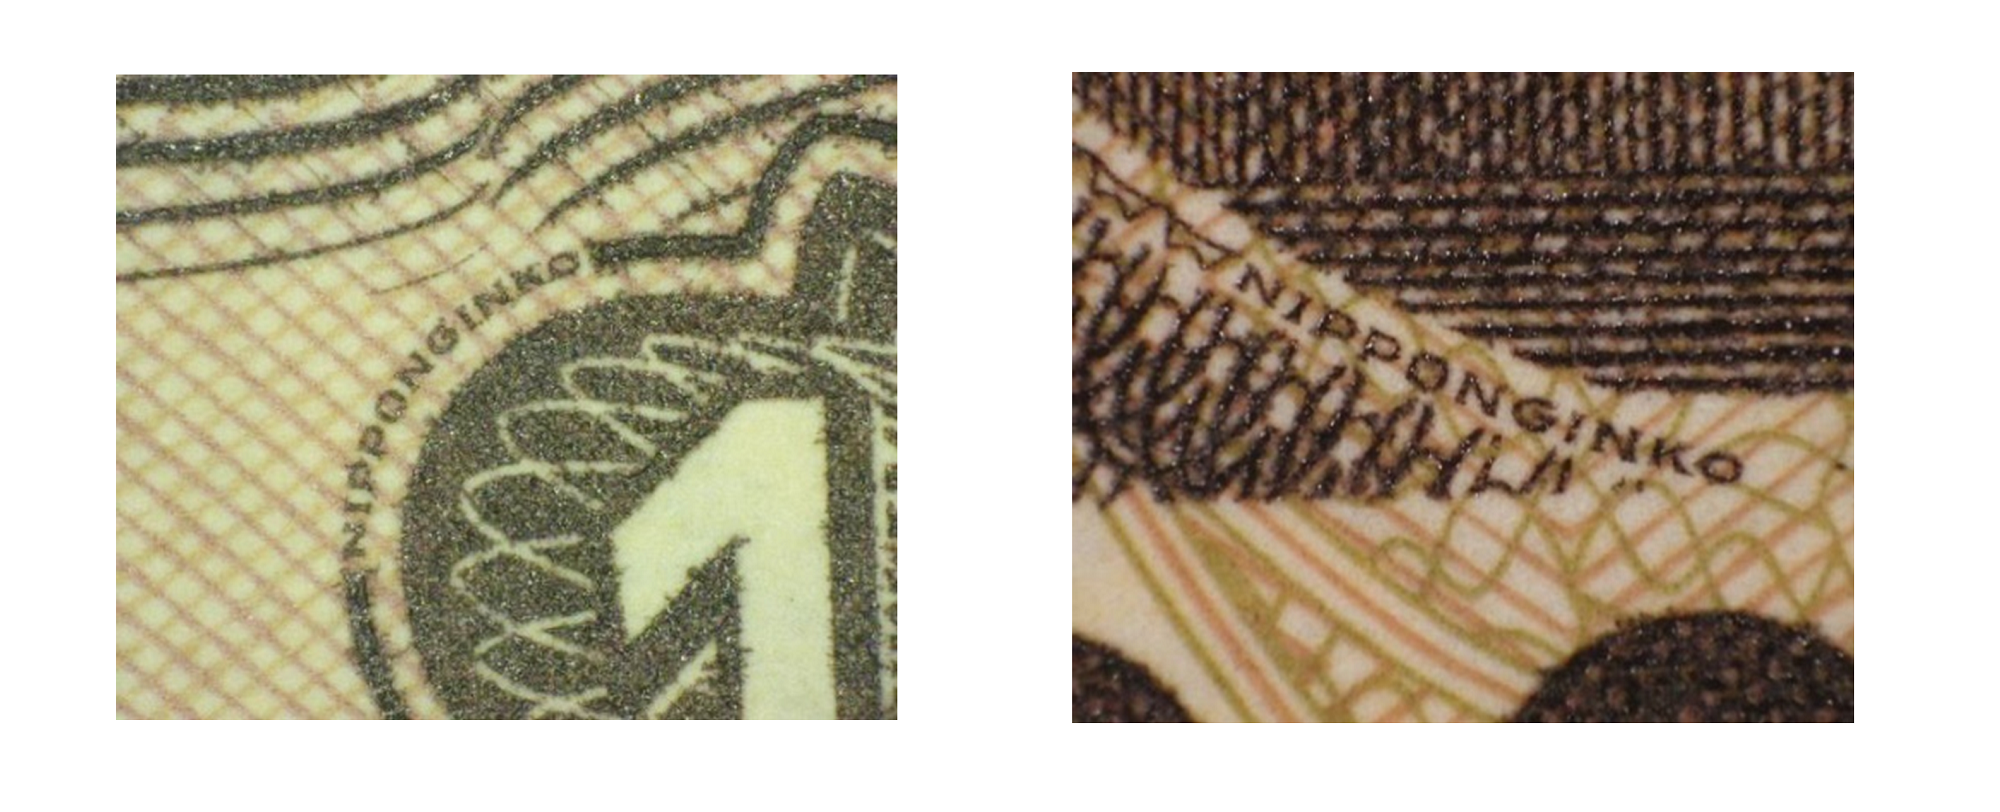 Images of micro letters on the 10,000 yen note.